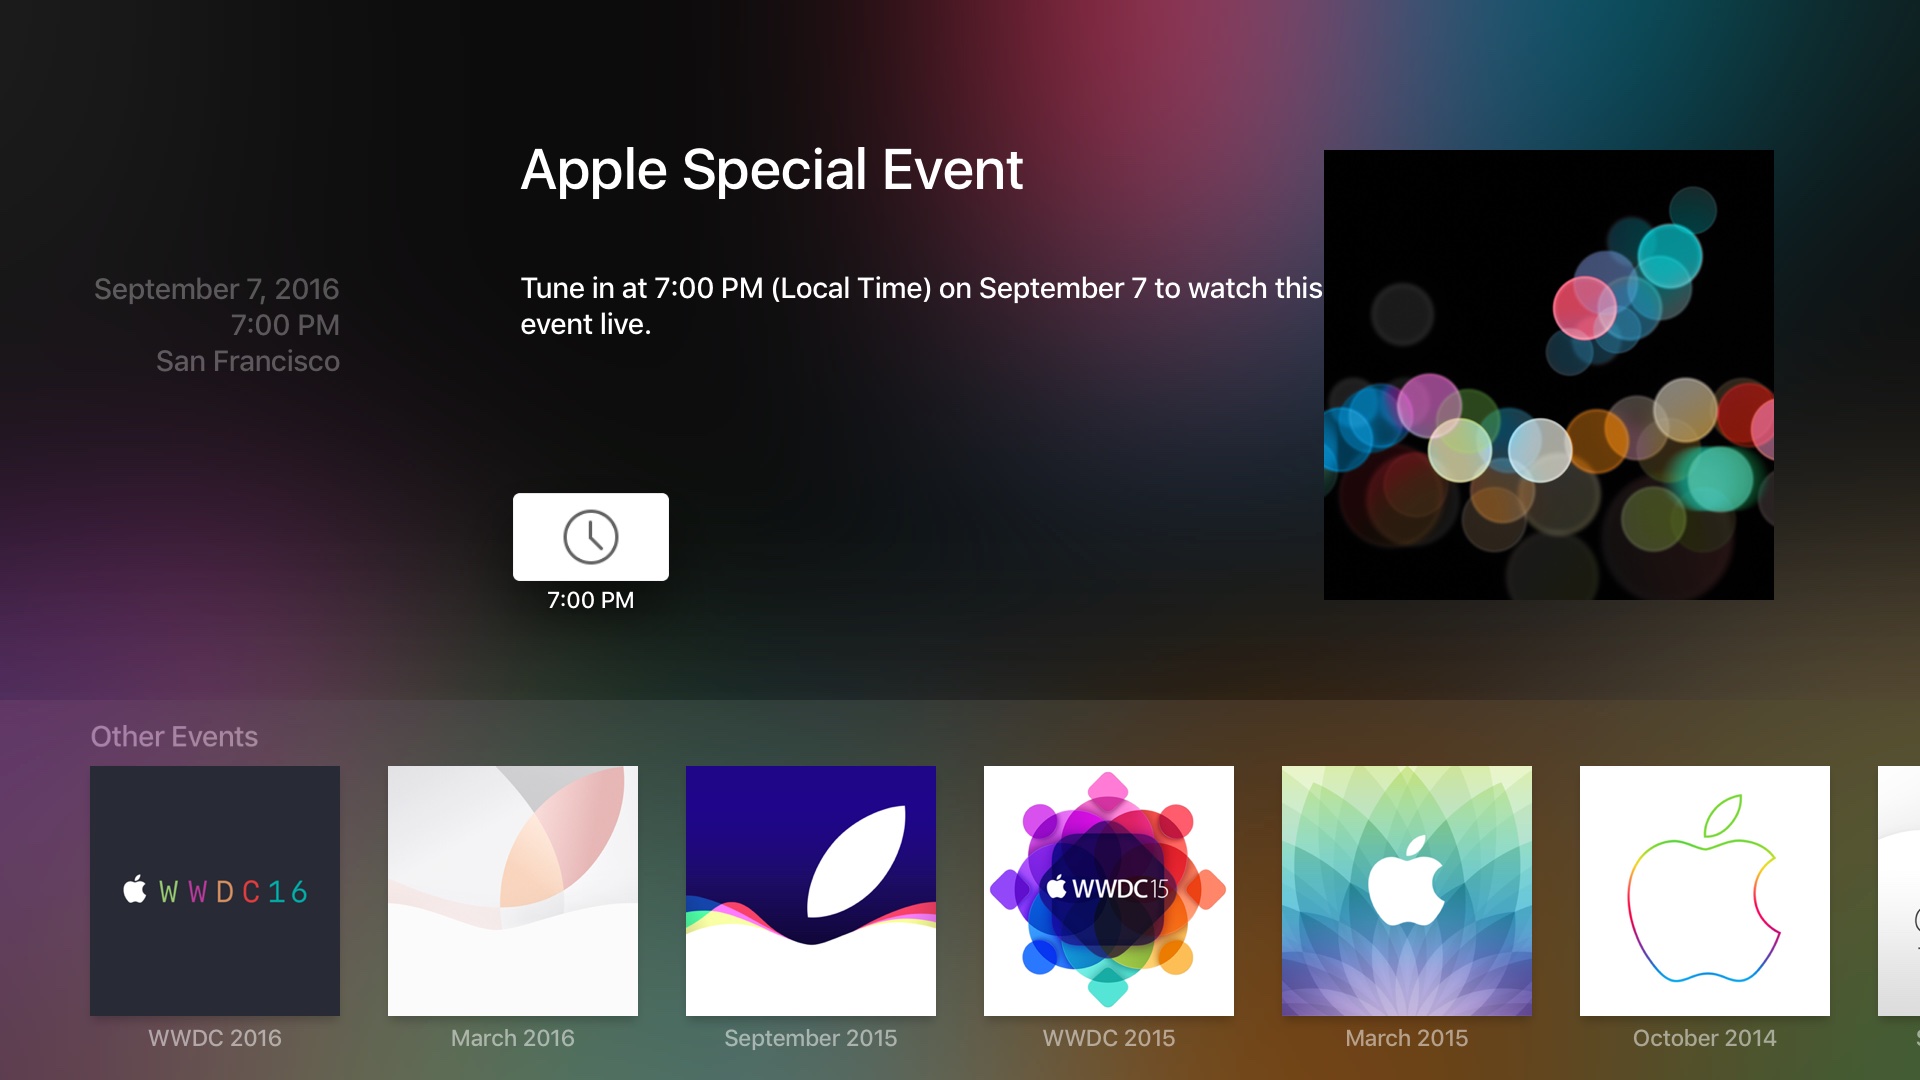 Apple Events app updated on Apple TV with text and graphics for iPhone 7 keynote